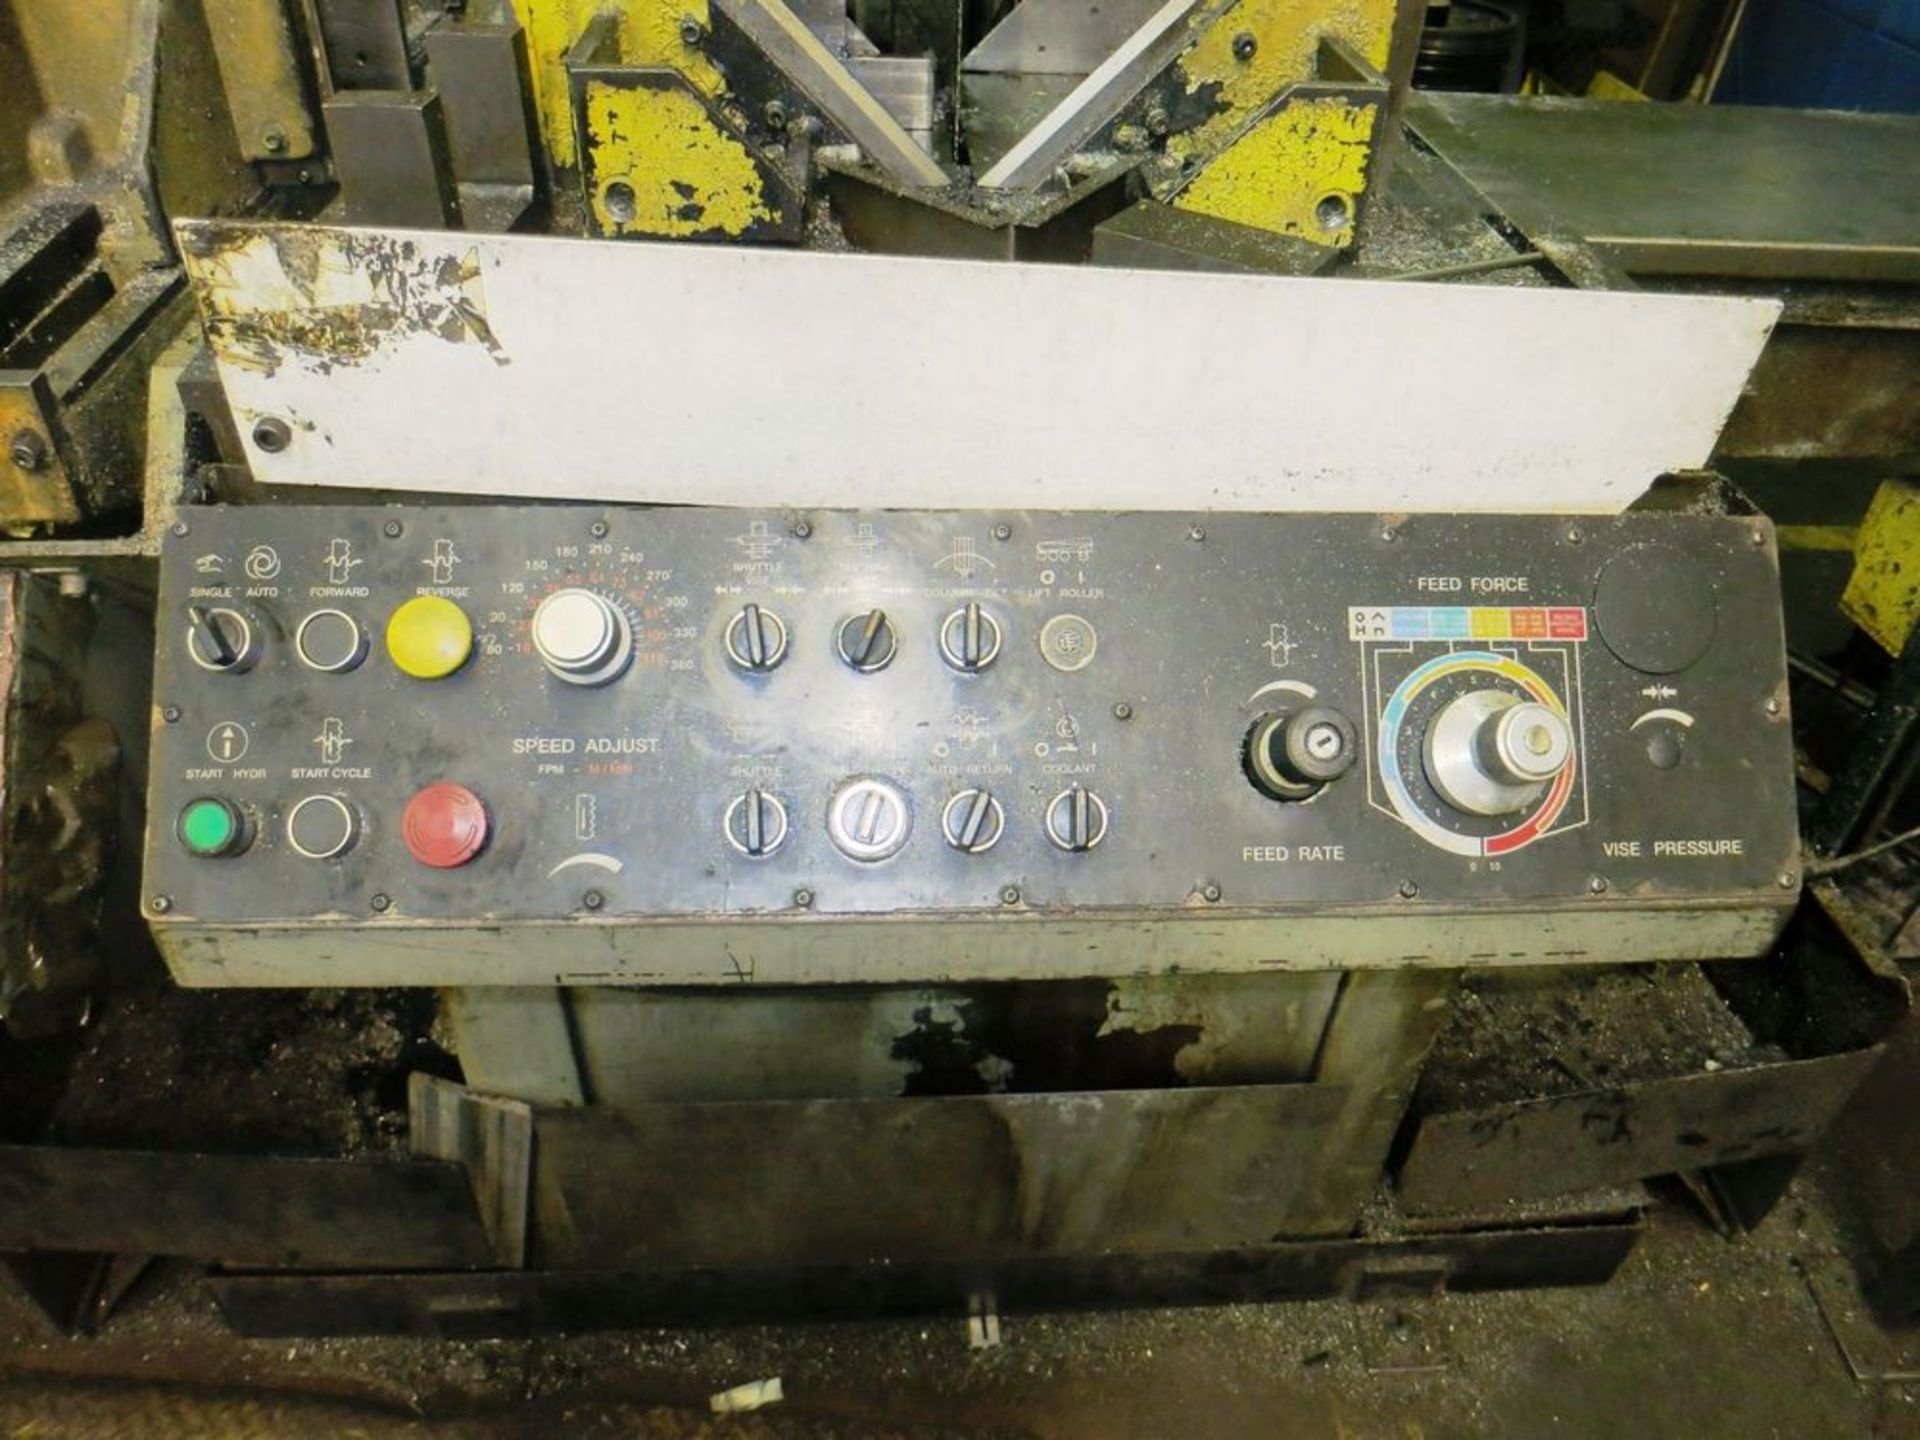 18"x20" Marvel MV460PC Vertical Mitre Cutting Band Saw, S/N 10167PC, New 1997 General - Image 3 of 7